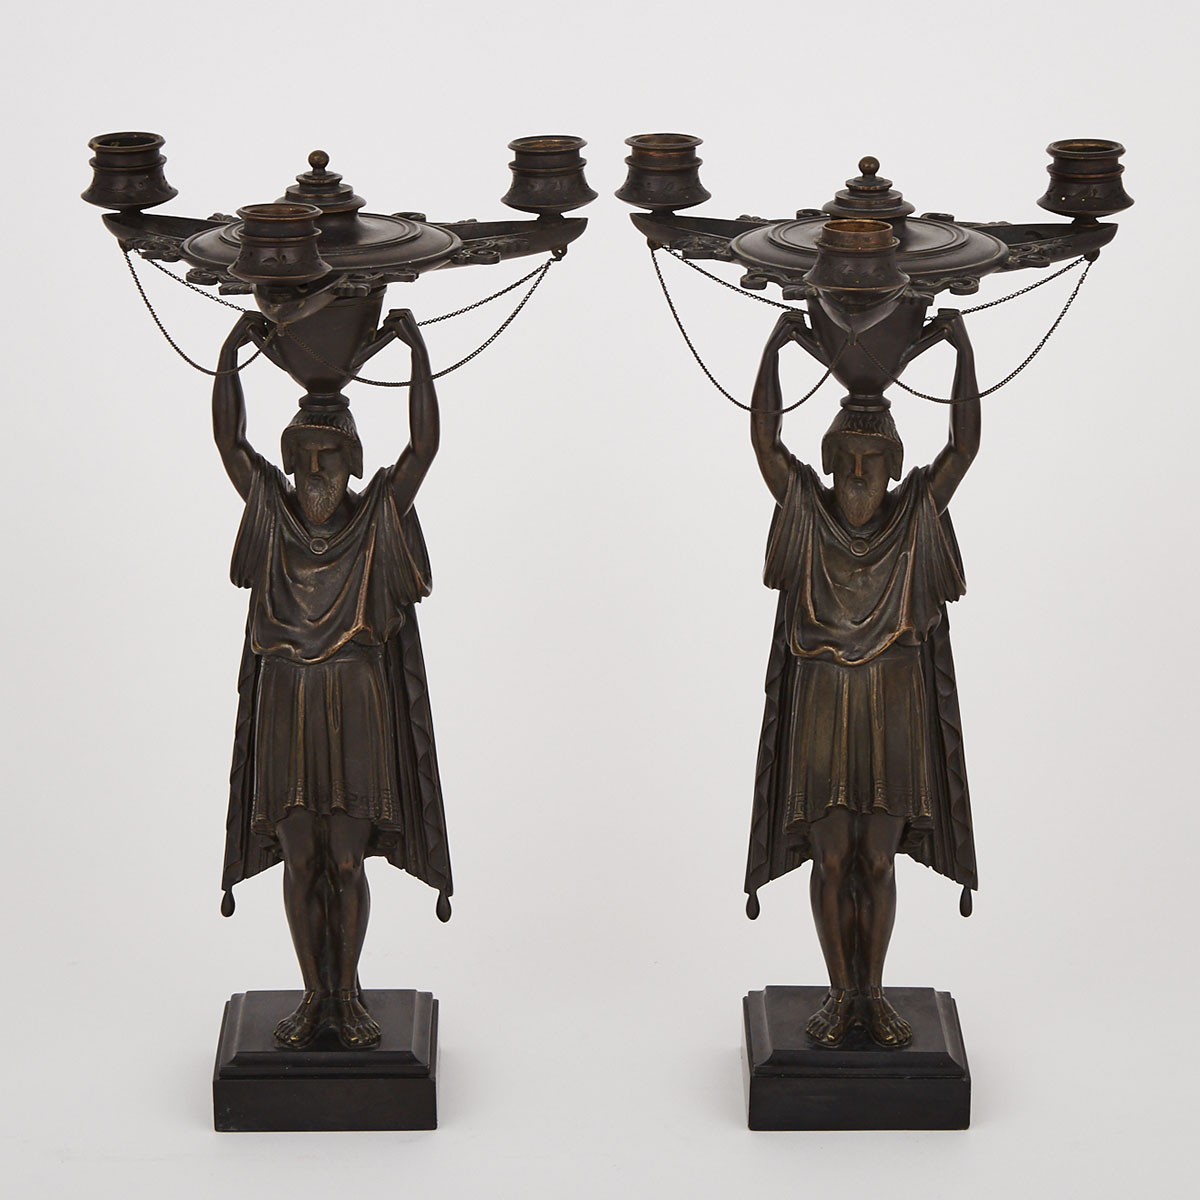 Pair of French Bronze Etruscan Revival Figural Candelabra, 19th century